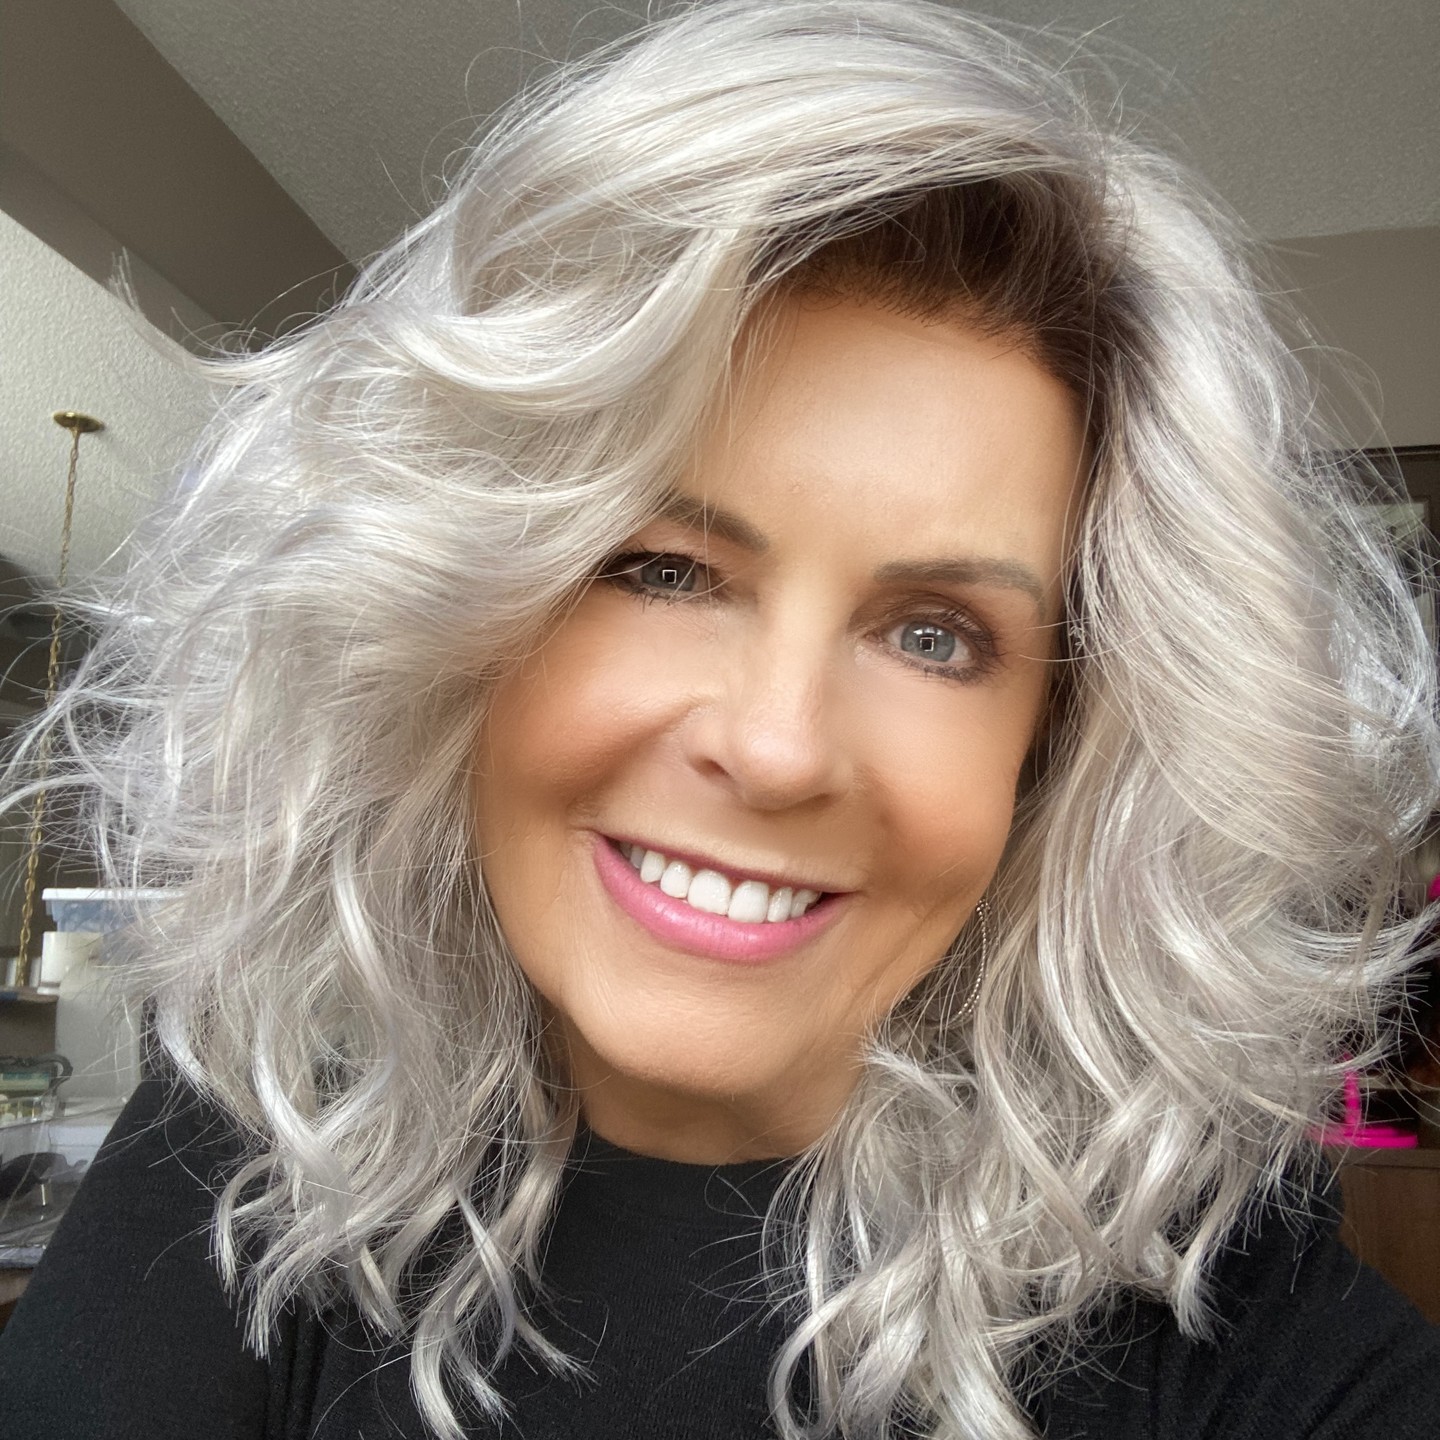 hairstyles for women over 50 94 Hairstyles for 50 year old woman with long hair | Hairstyles for women over 50 with fine hair | Medium length hairstyles for women over 50 Hairstyles for women over 50